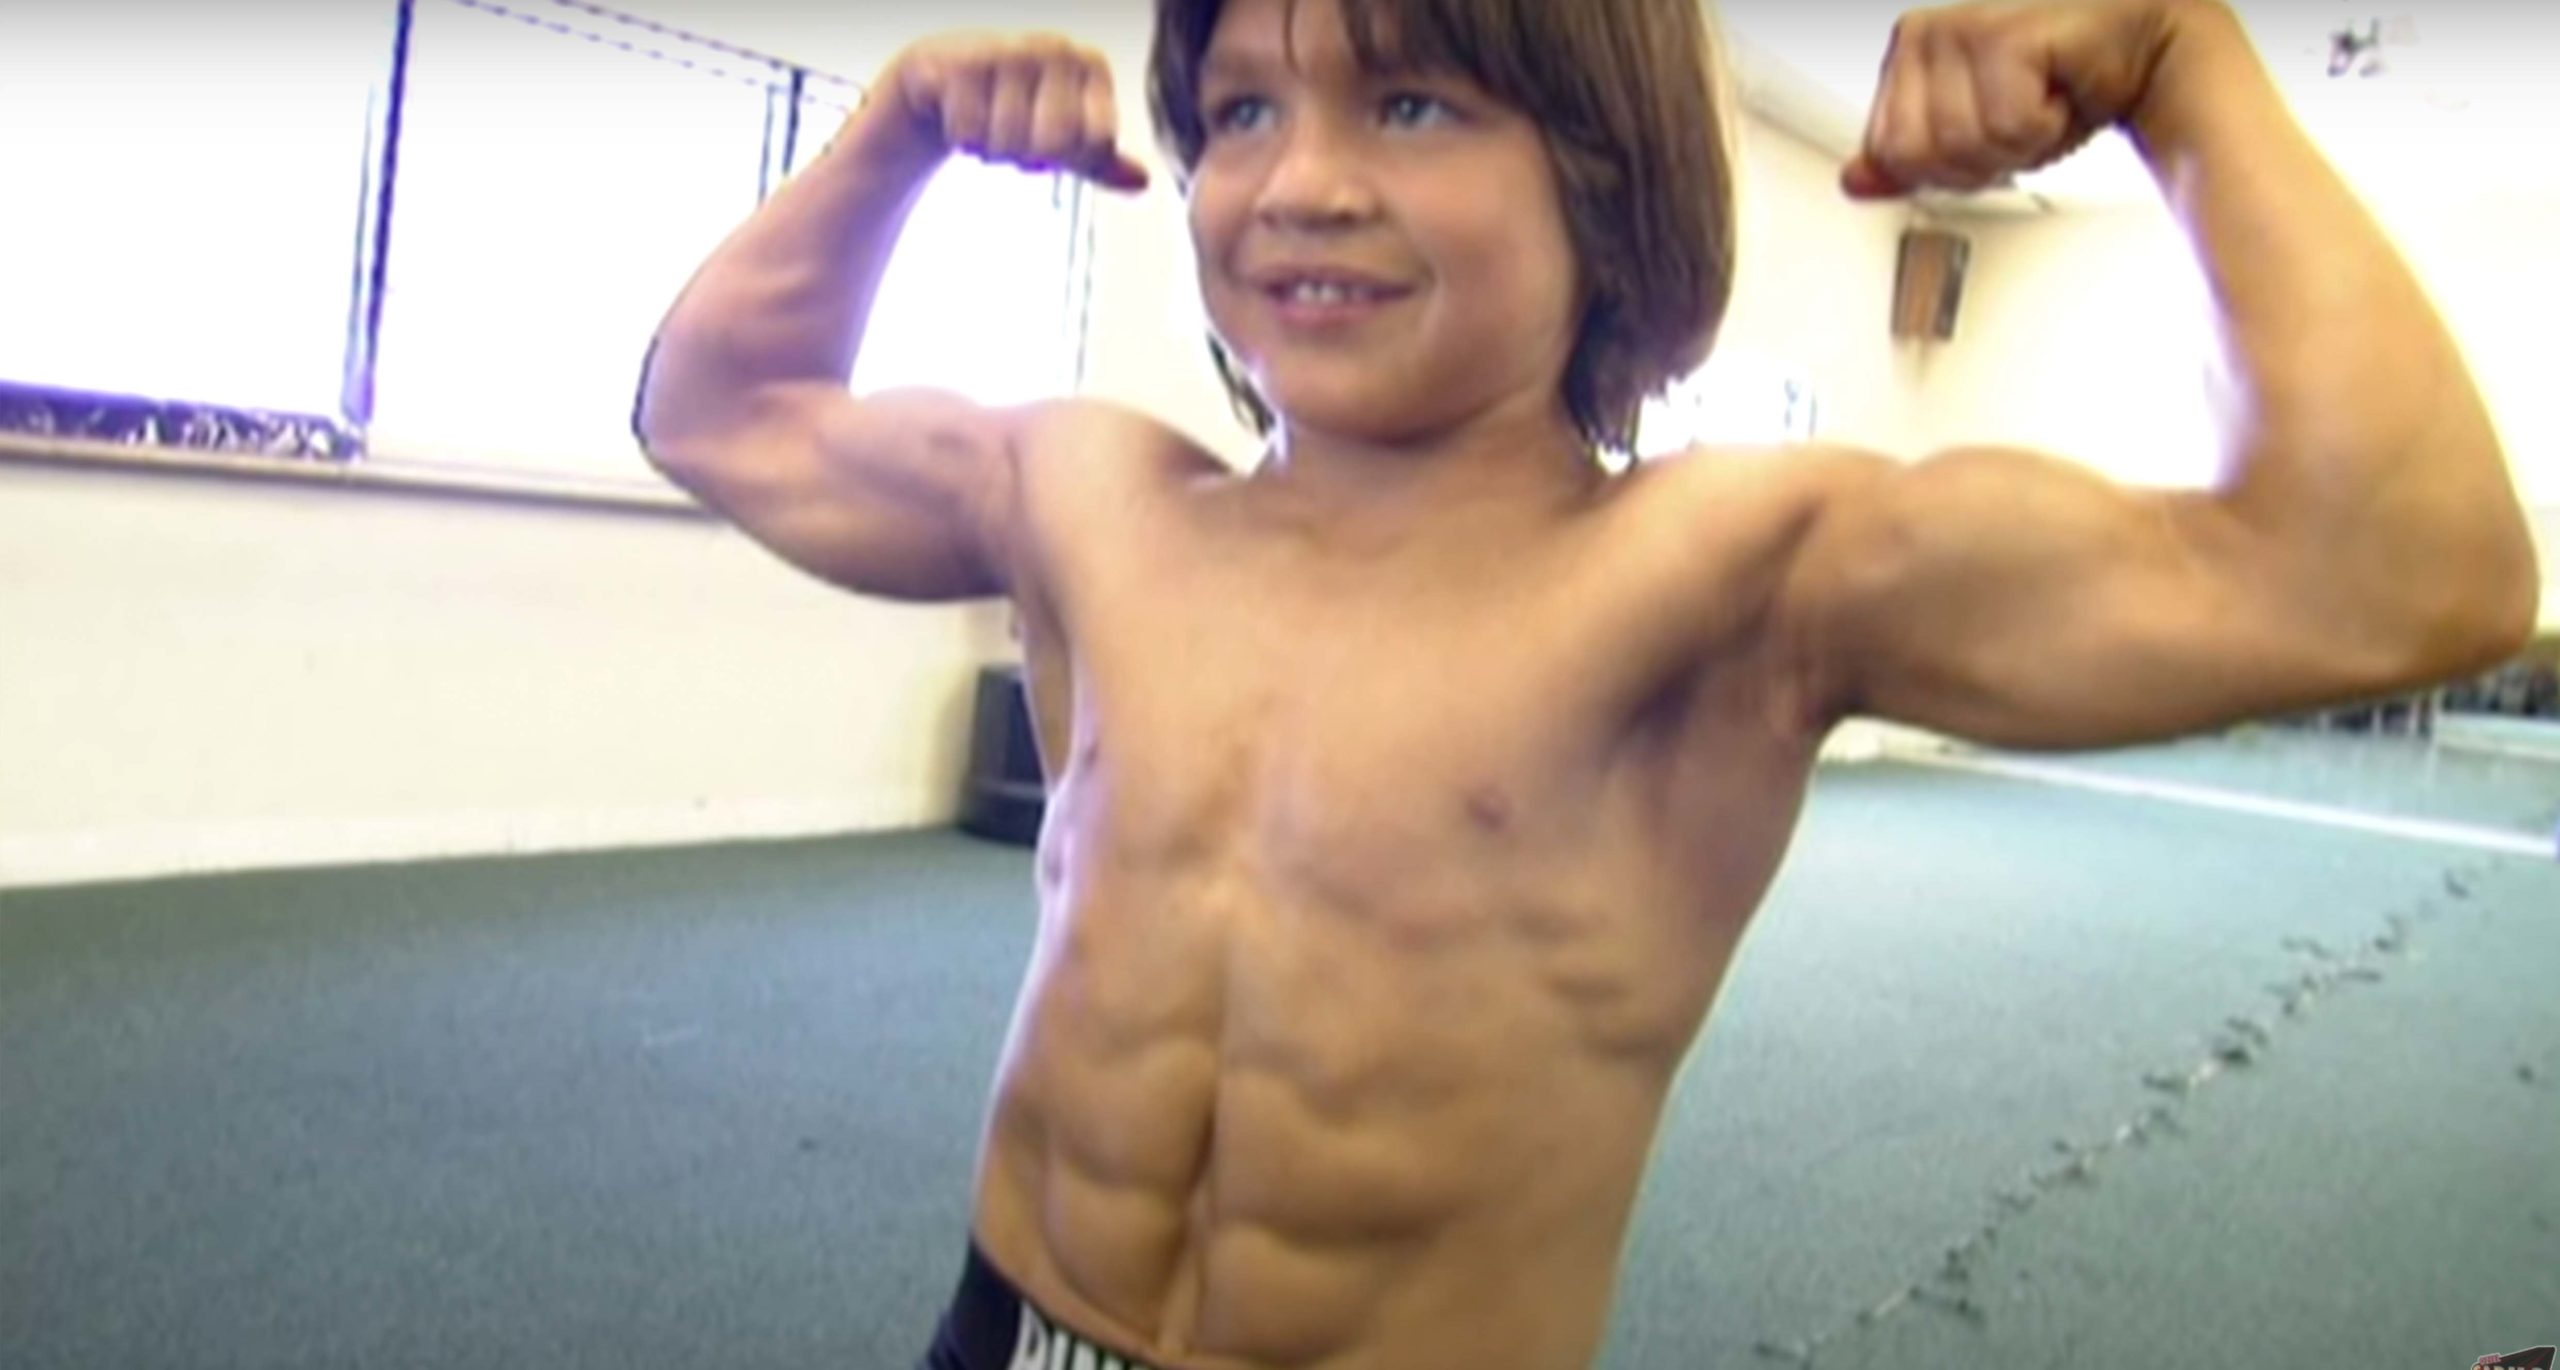 ‘Little Hercules’ was known as “The World’s Strongest Boy’ sit down